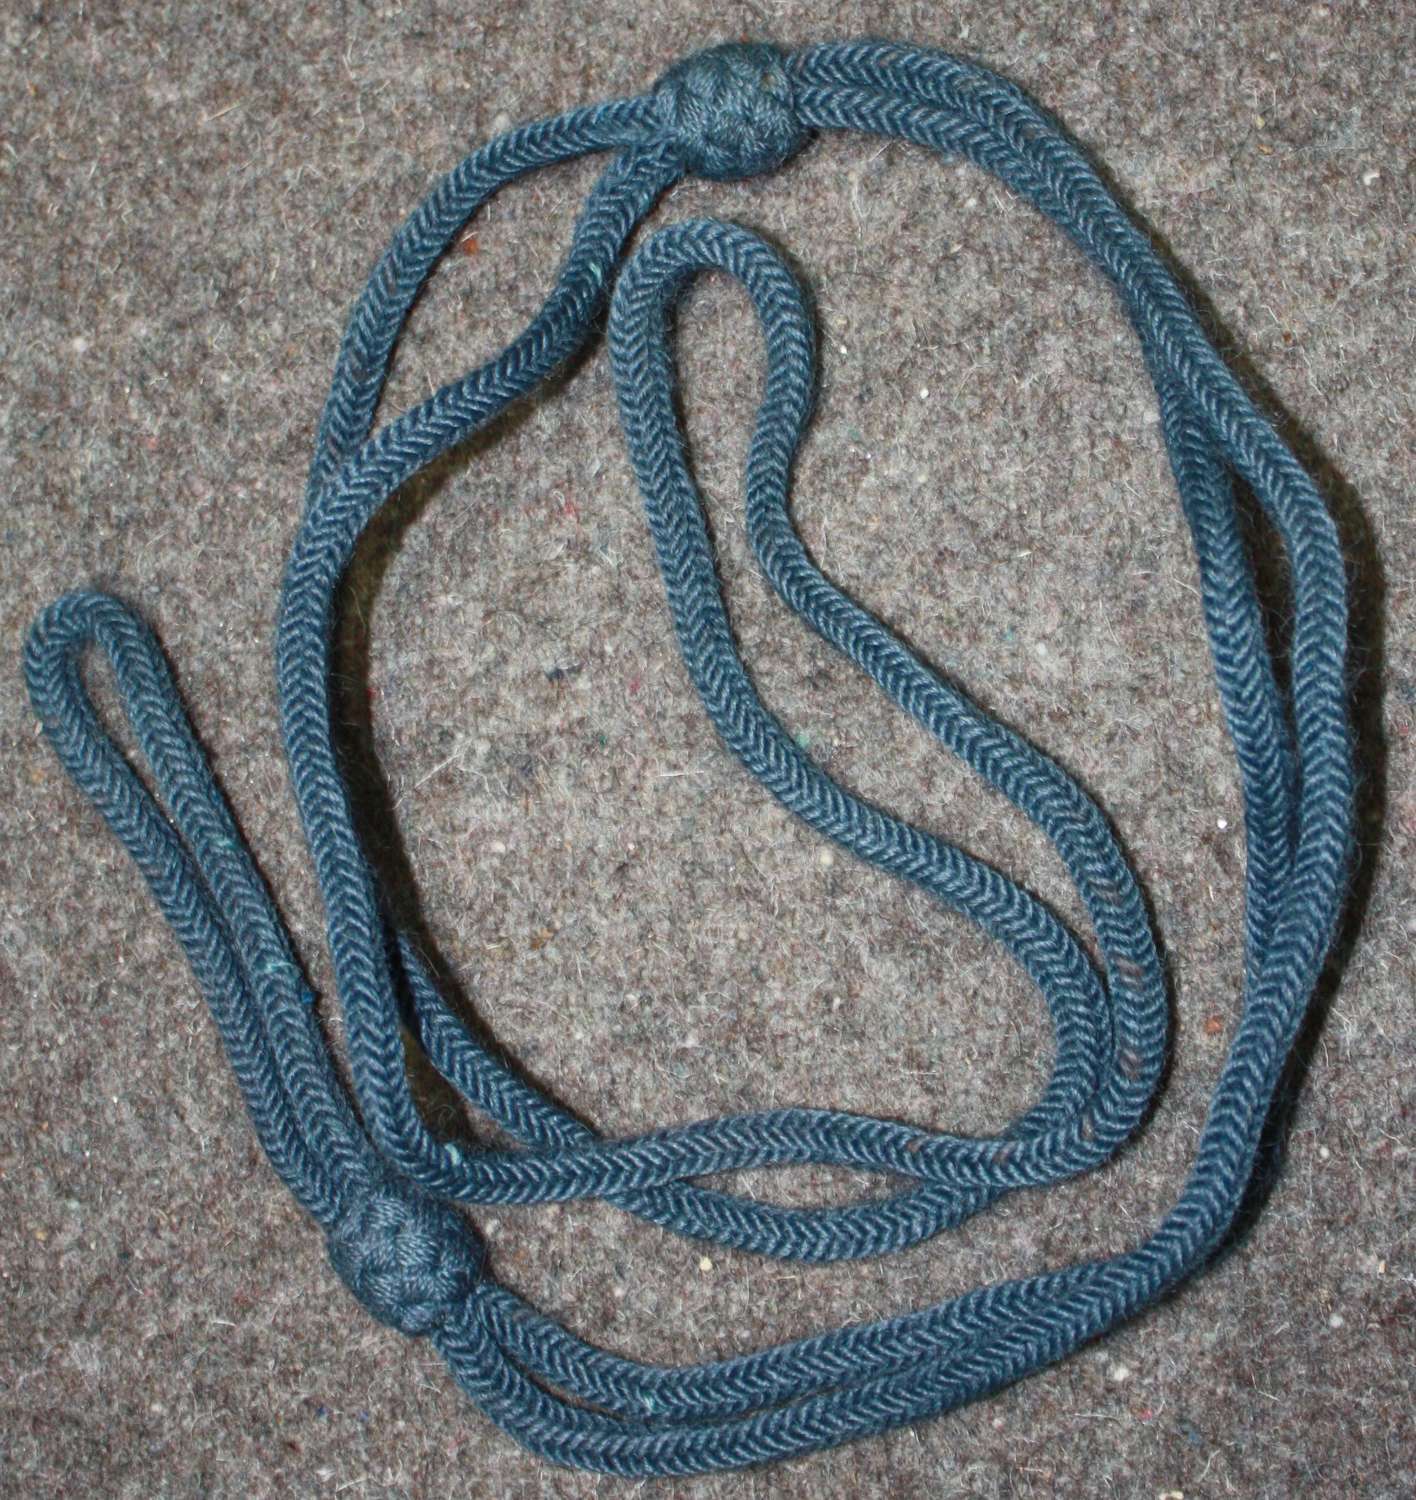 A WWII PERIOD RAF OTHER RANKS PISTOL LANYARD